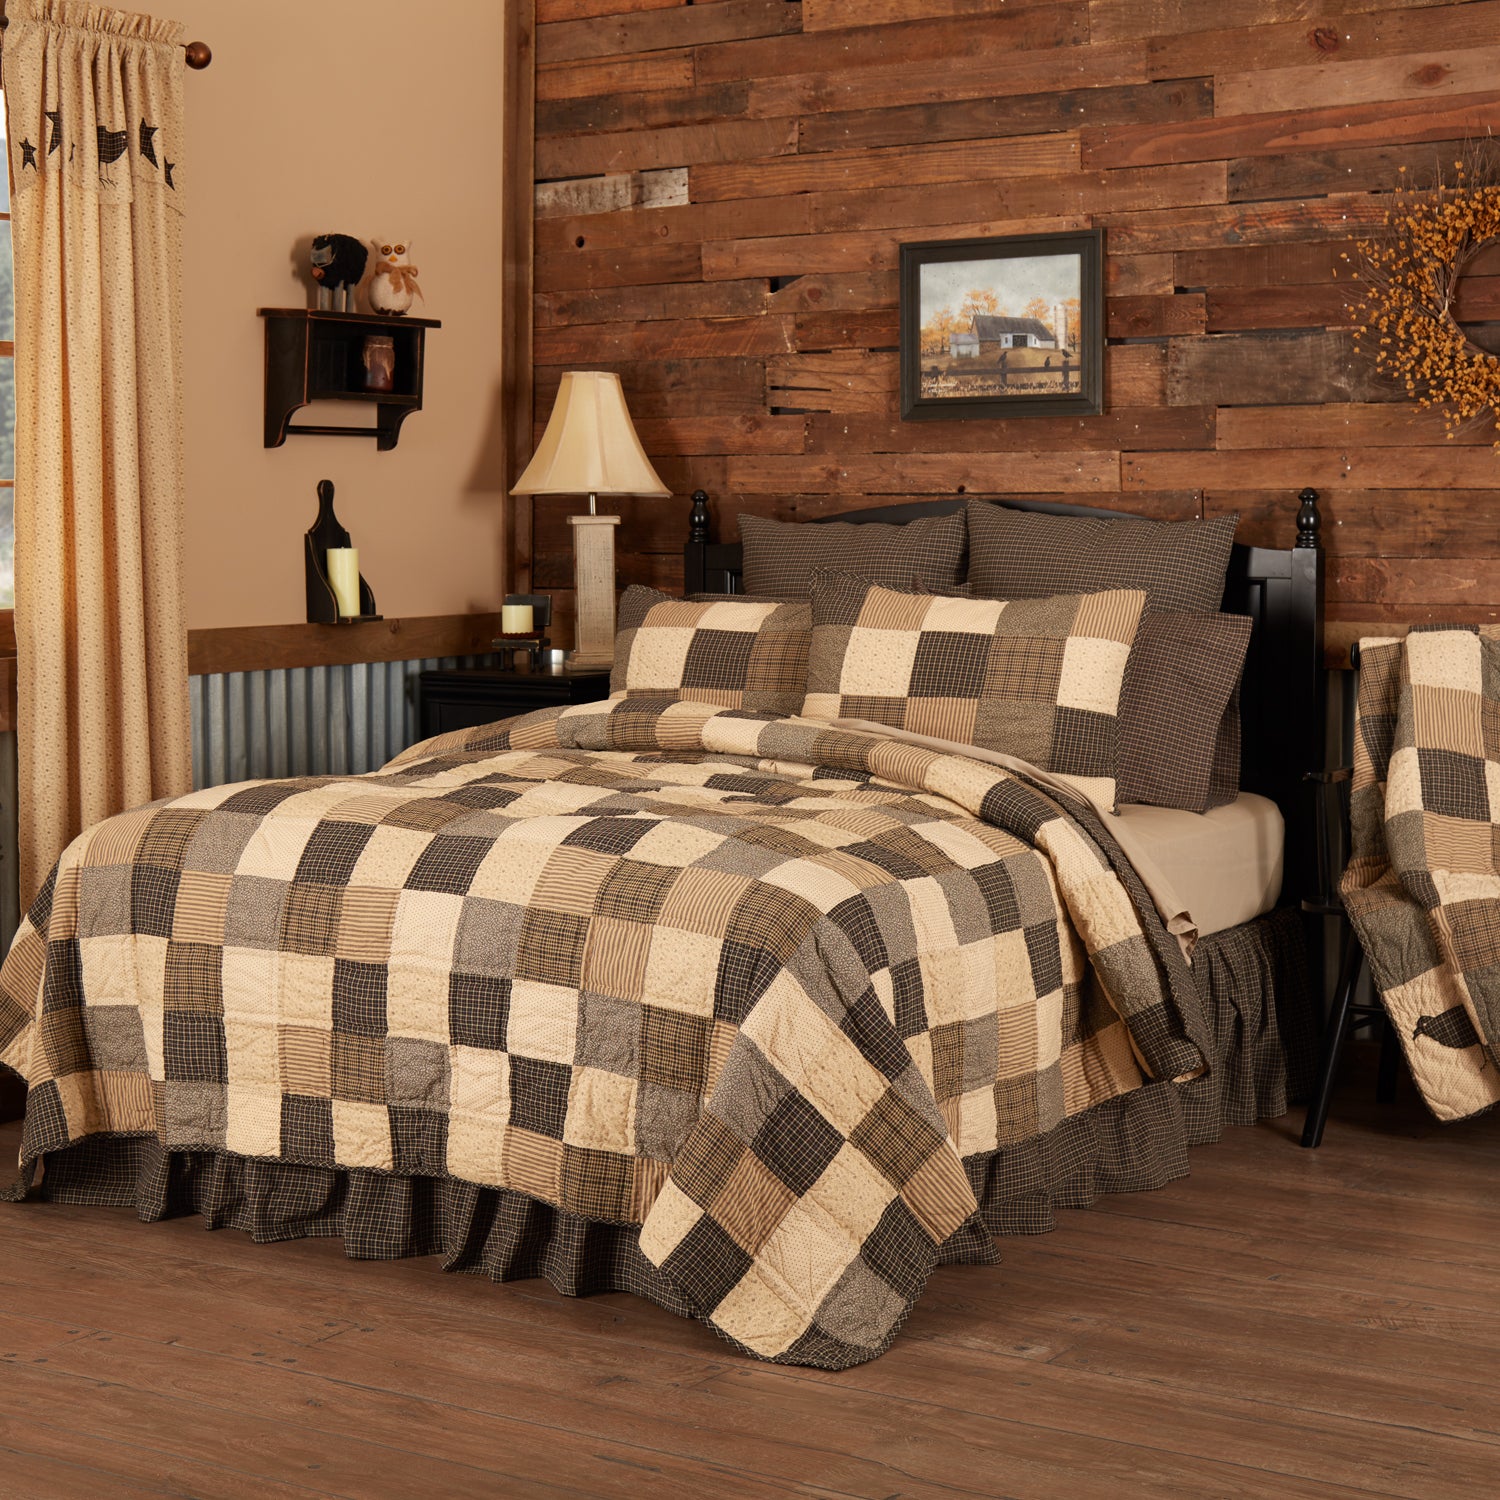 10146-Kettle-Grove-Luxury-King-Quilt-120Wx105L-image-3